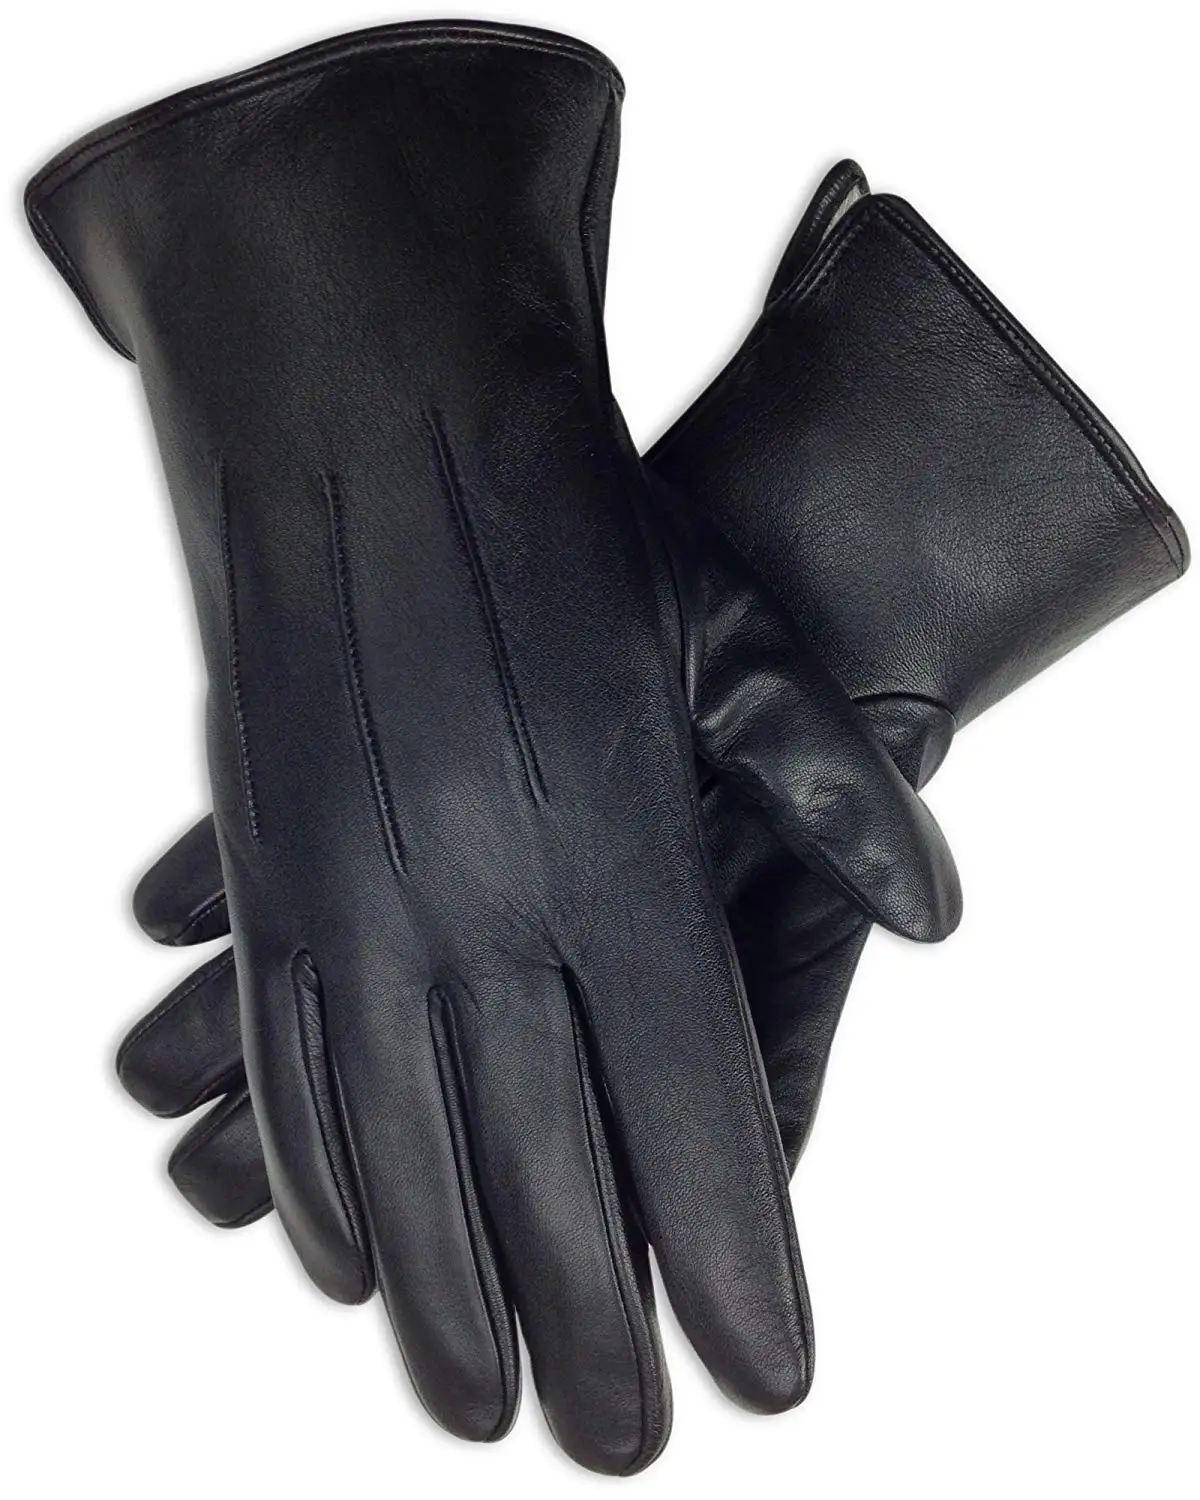 mens brown leather fur lined gloves